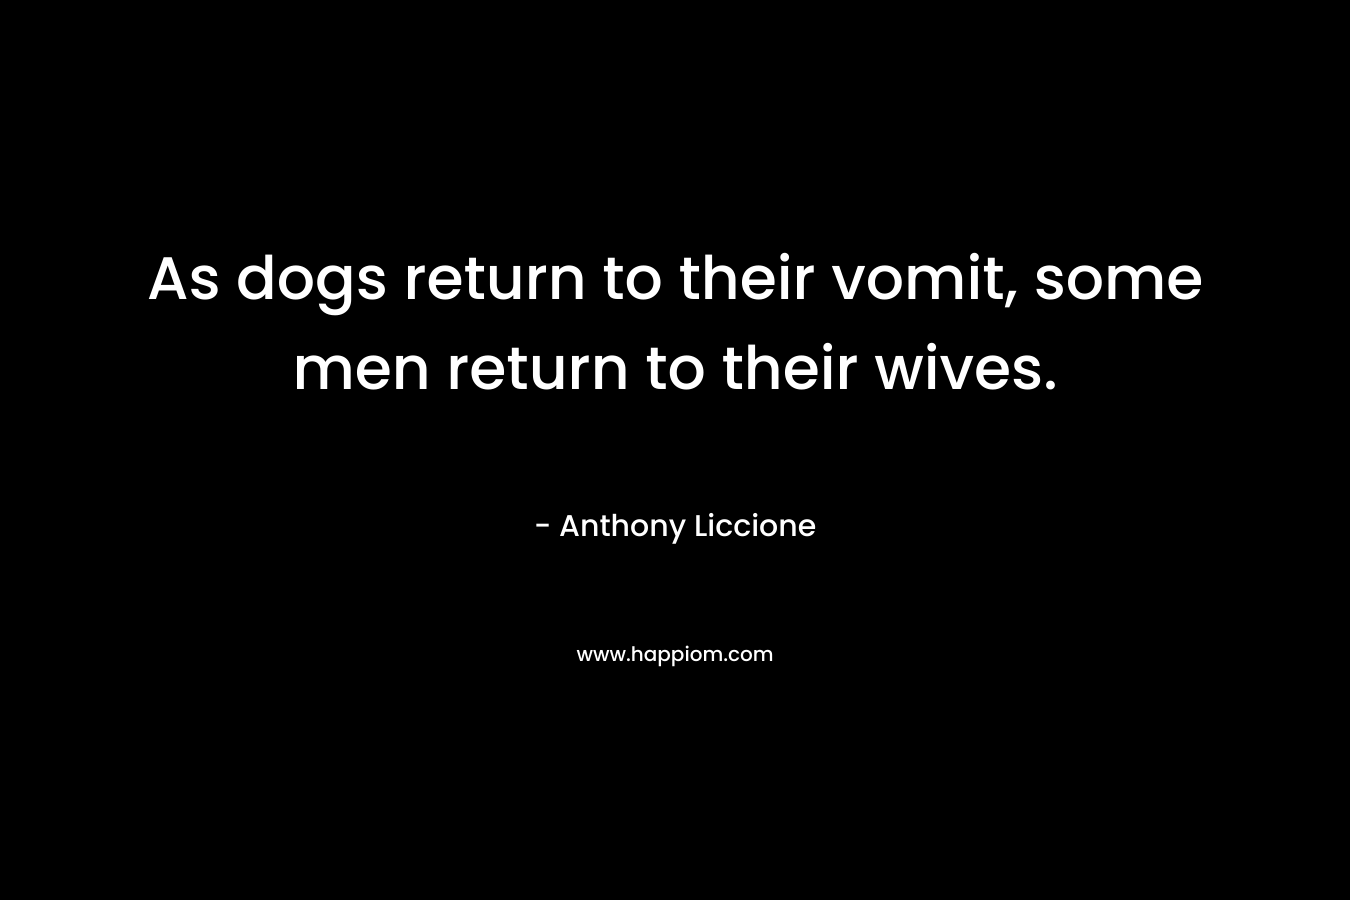 As dogs return to their vomit, some men return to their wives.